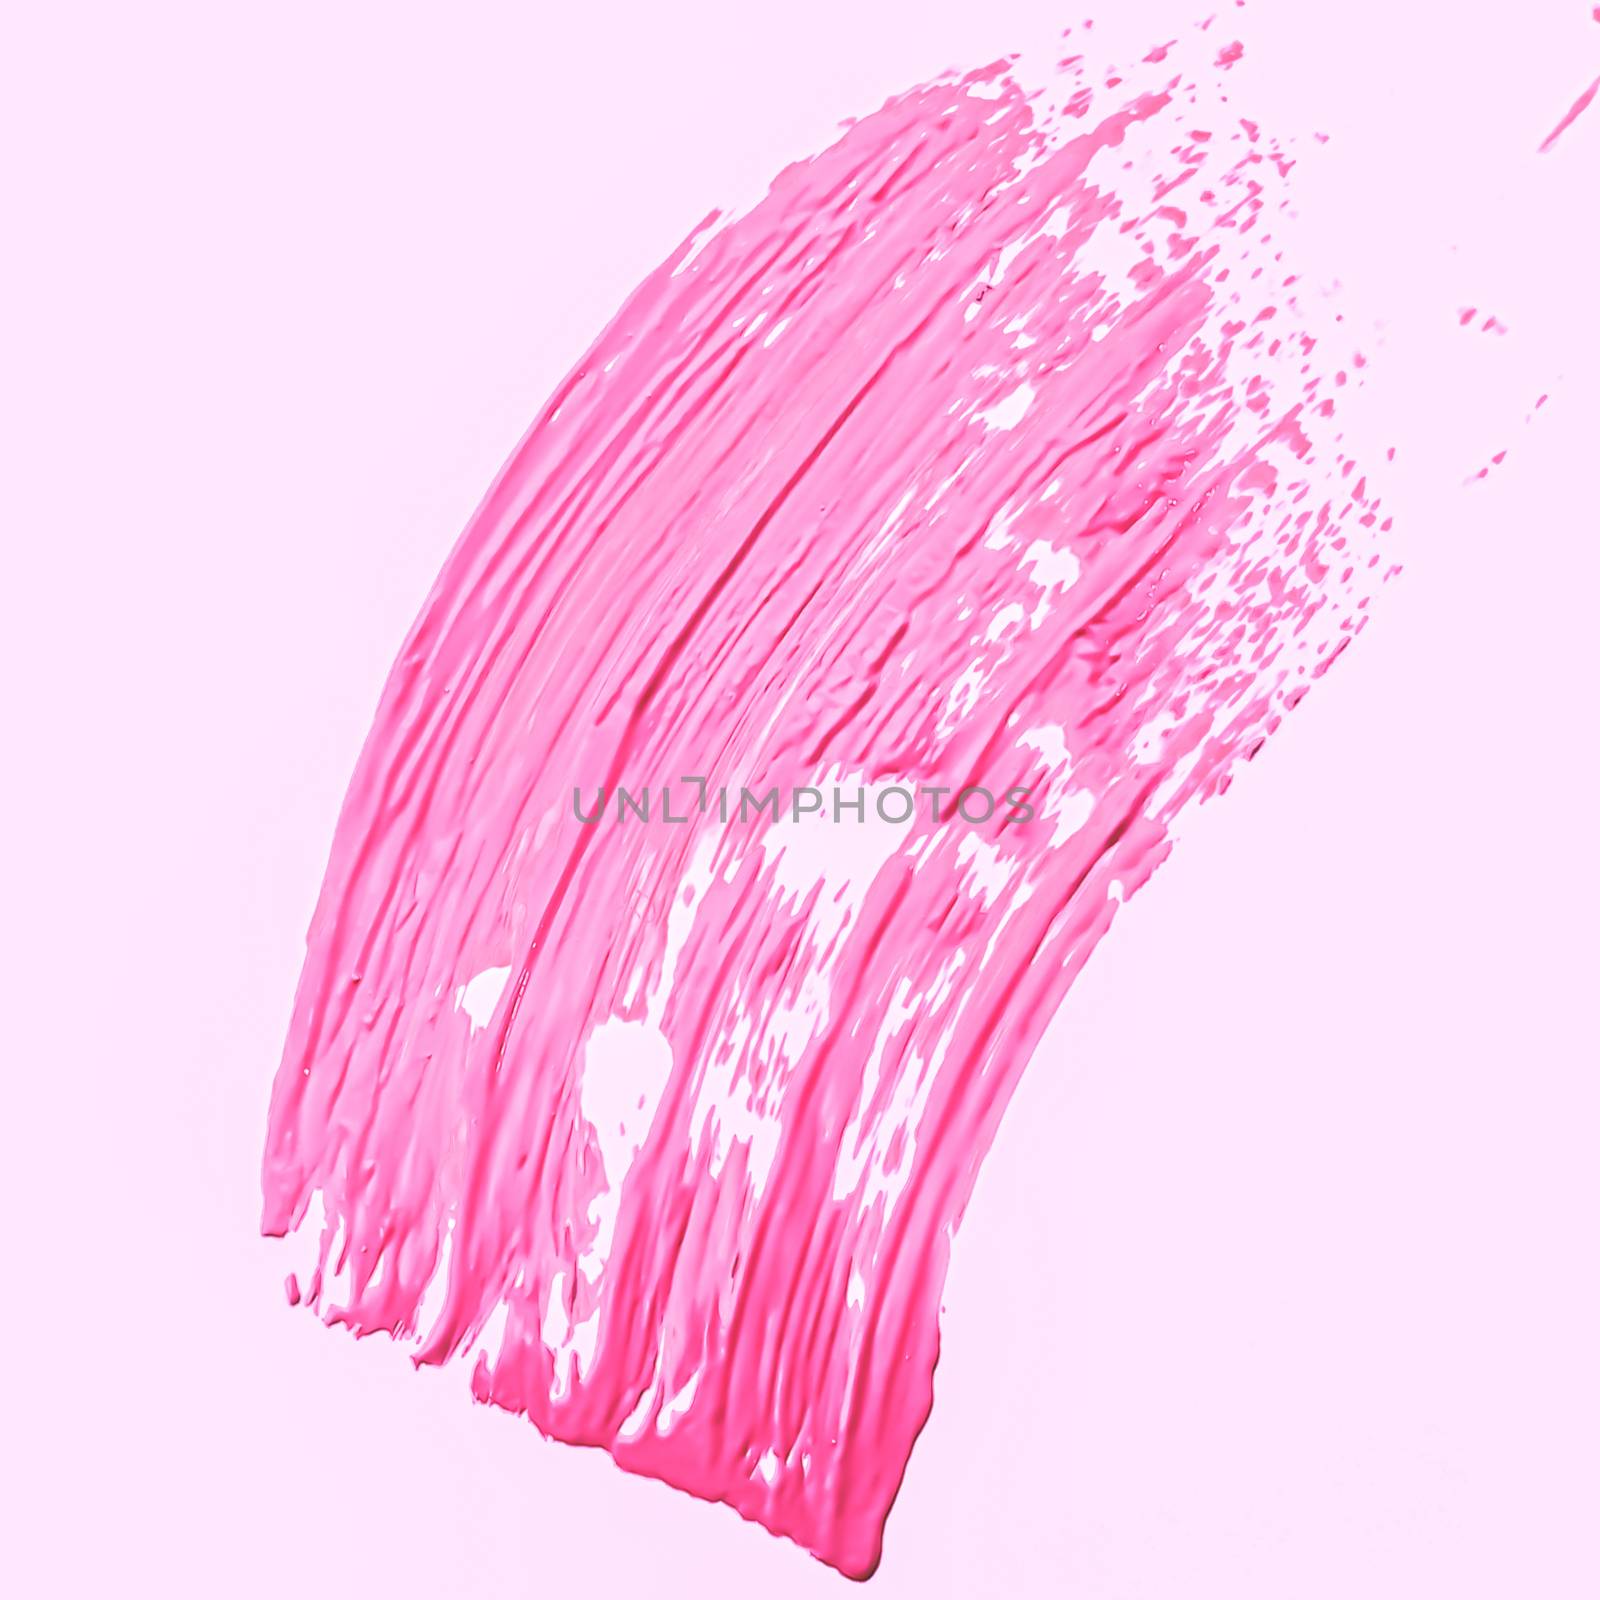 Pink brush stroke or makeup smudge closeup, beauty cosmetics and by Anneleven